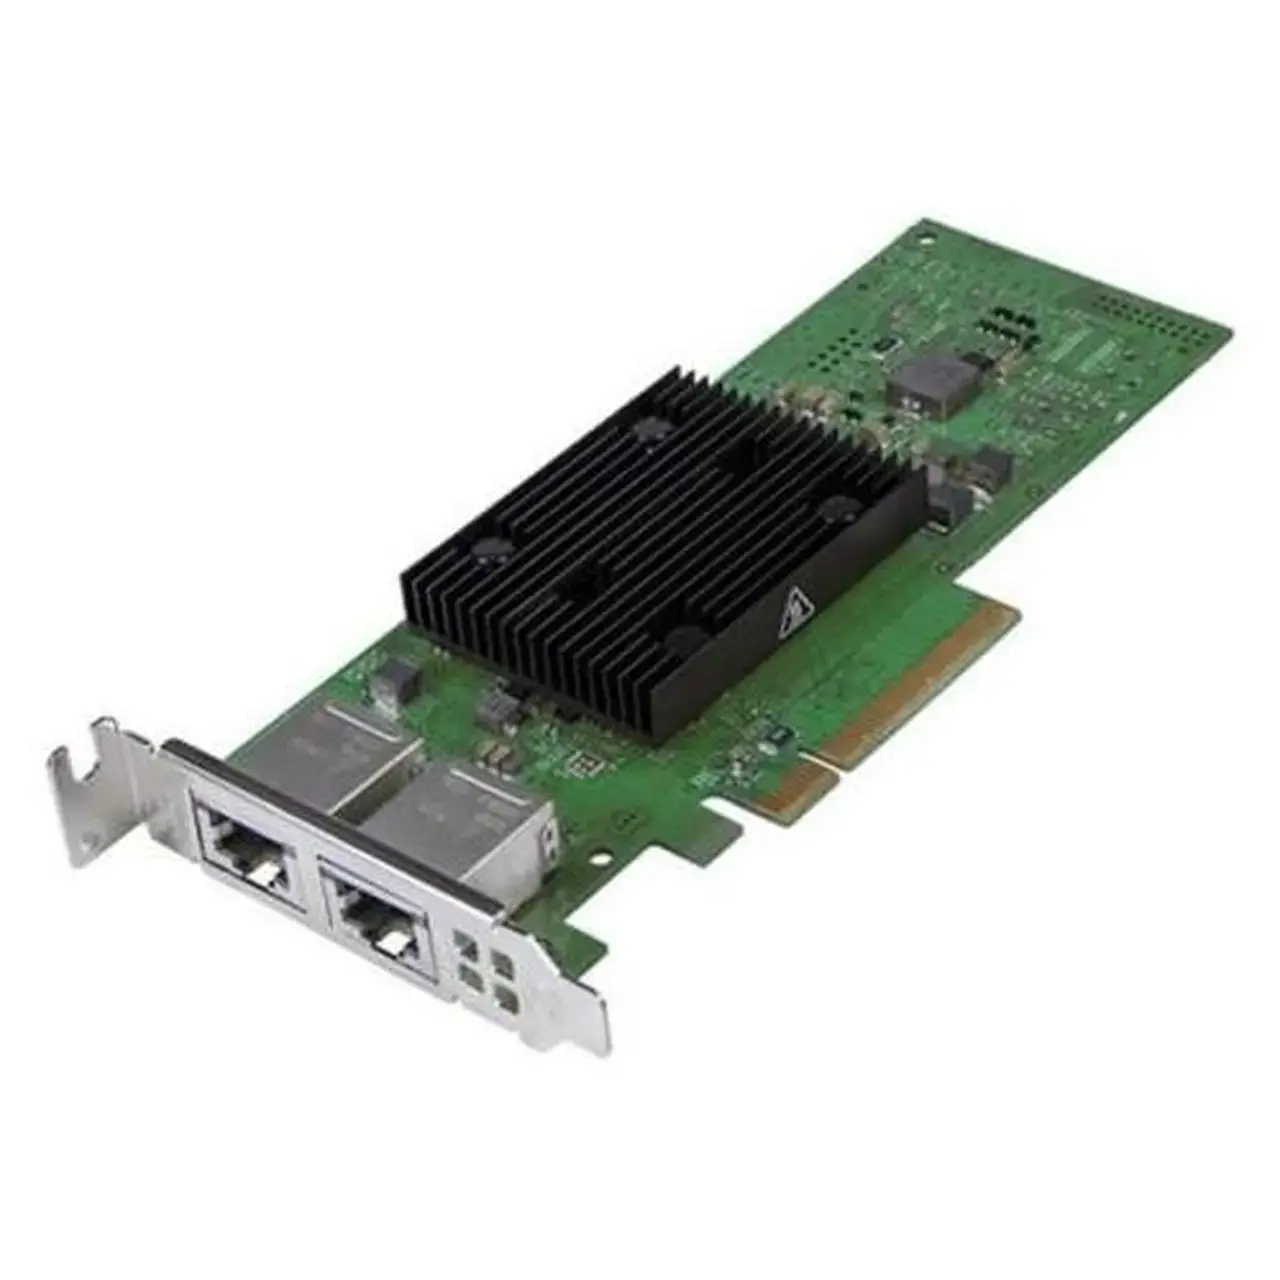 BCM957406A4060 Dell Broadcom 57406 DP 10GBase-T LP Netw...